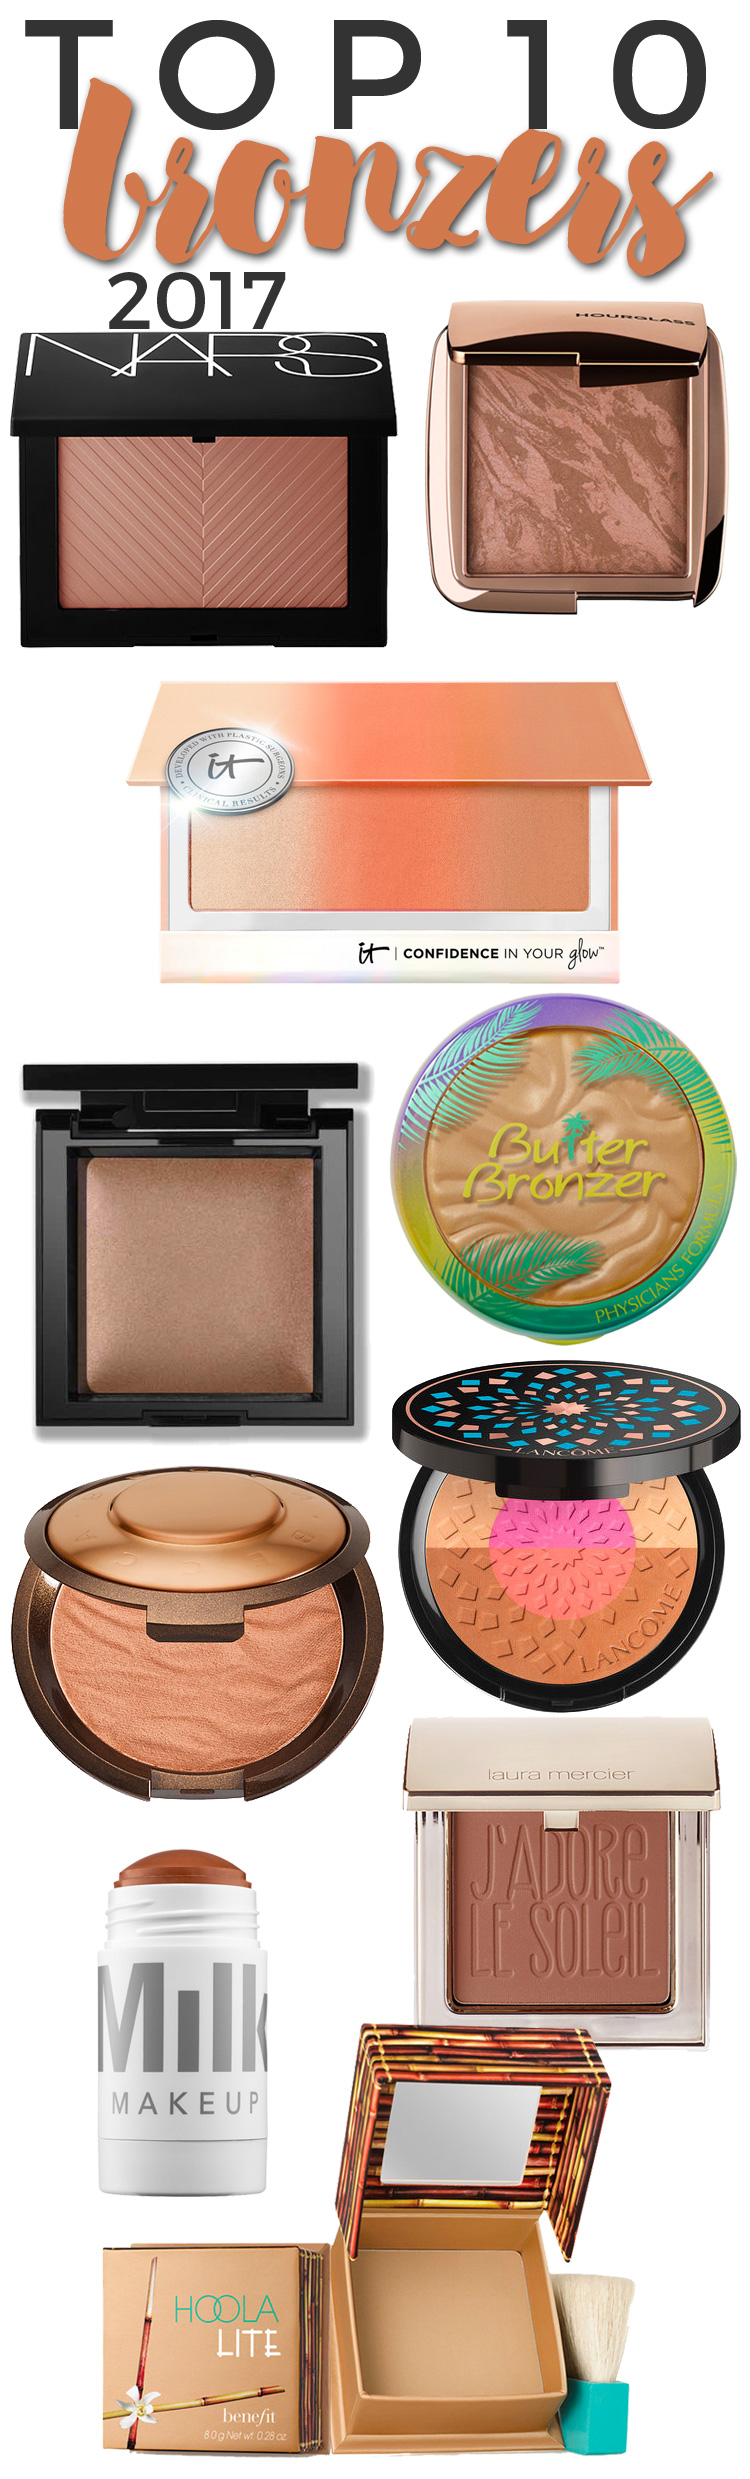 Top 10 Bronzers for 2017.